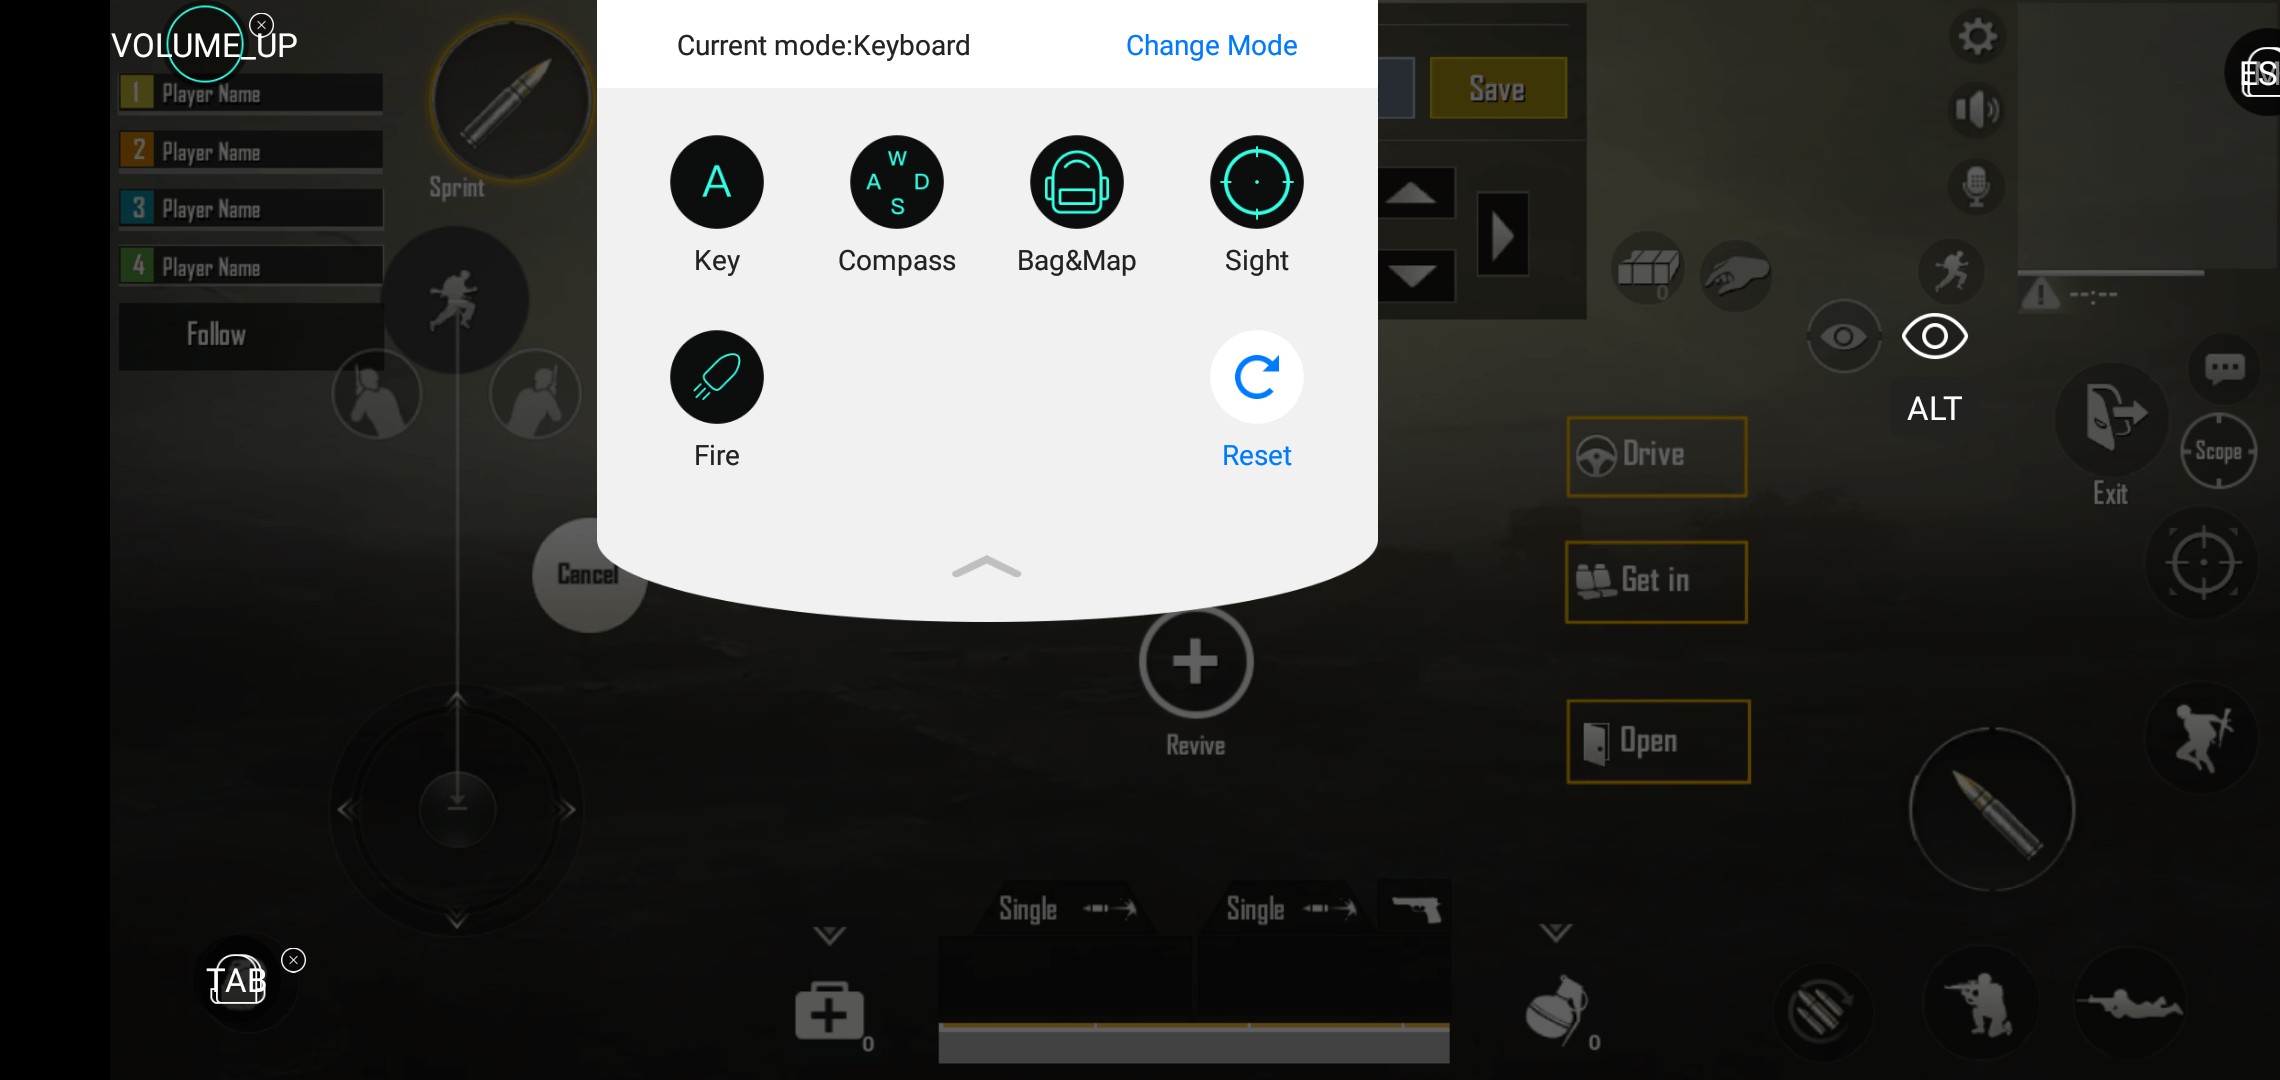 How to use volume buttons to fire in PUBG mobile.